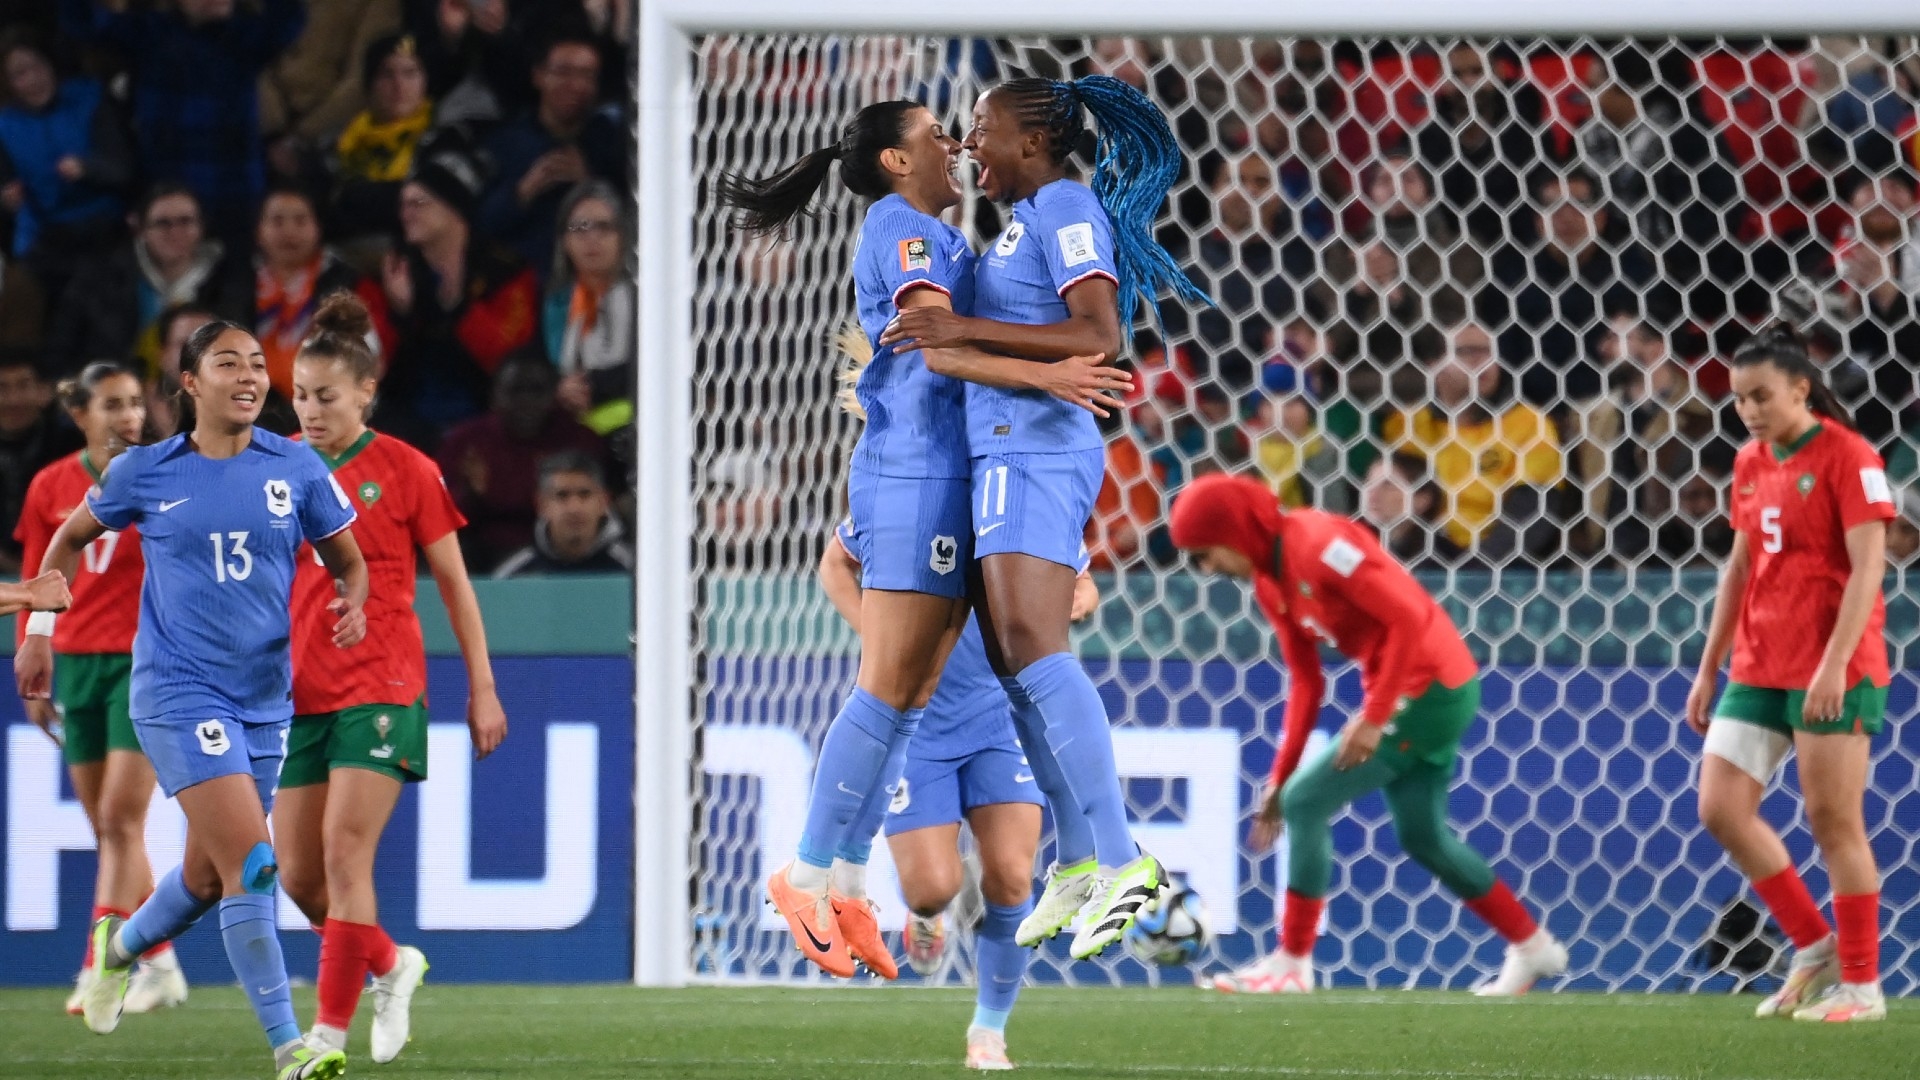 France's players celebrate during their 2023 Women's World Cup round of 16 football match against Morocco at Hindmarsh Stadium in Adelaide on 8 August 2023 (AFP)